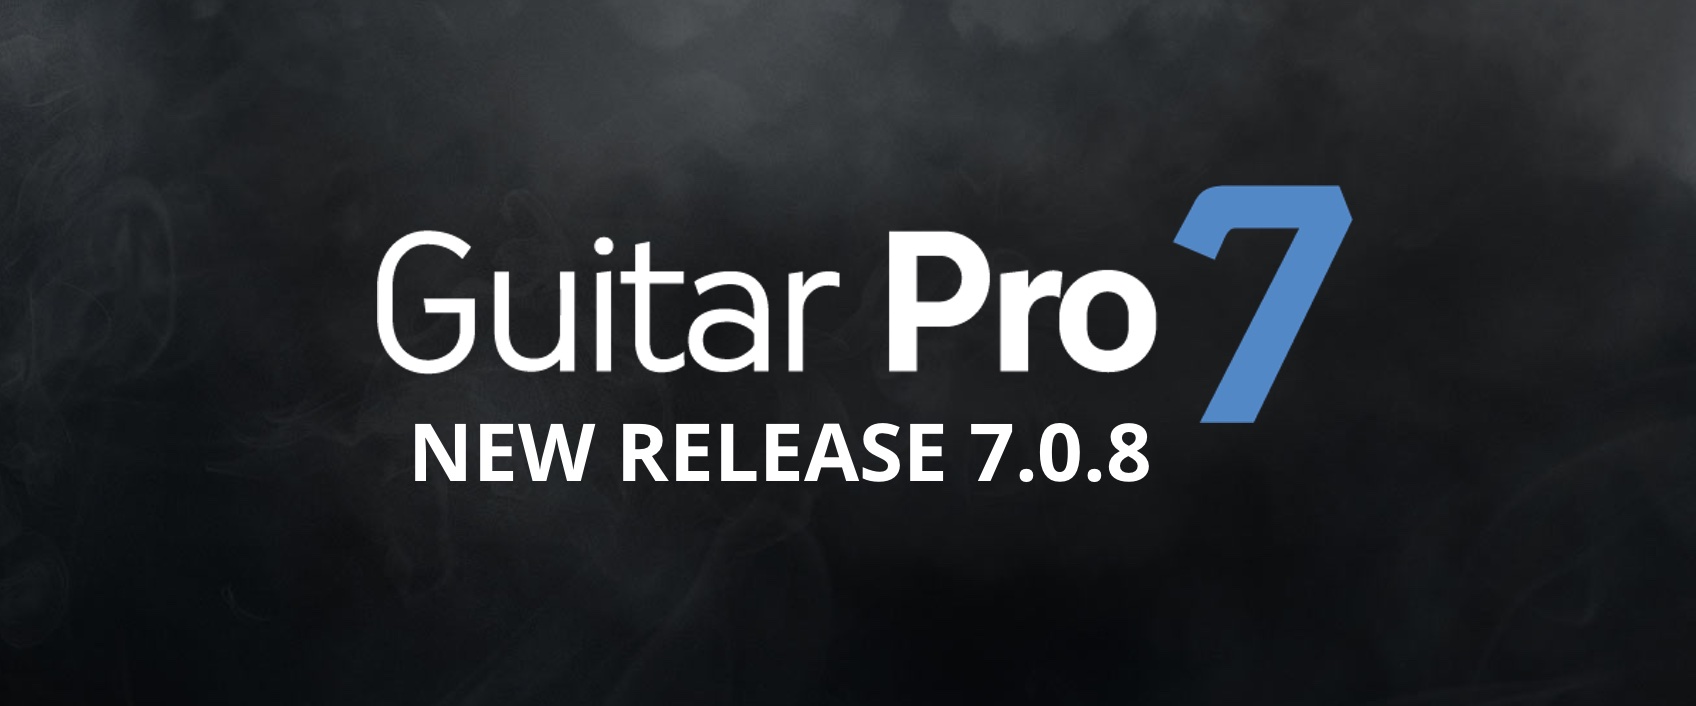 fast guitar pro 7 download